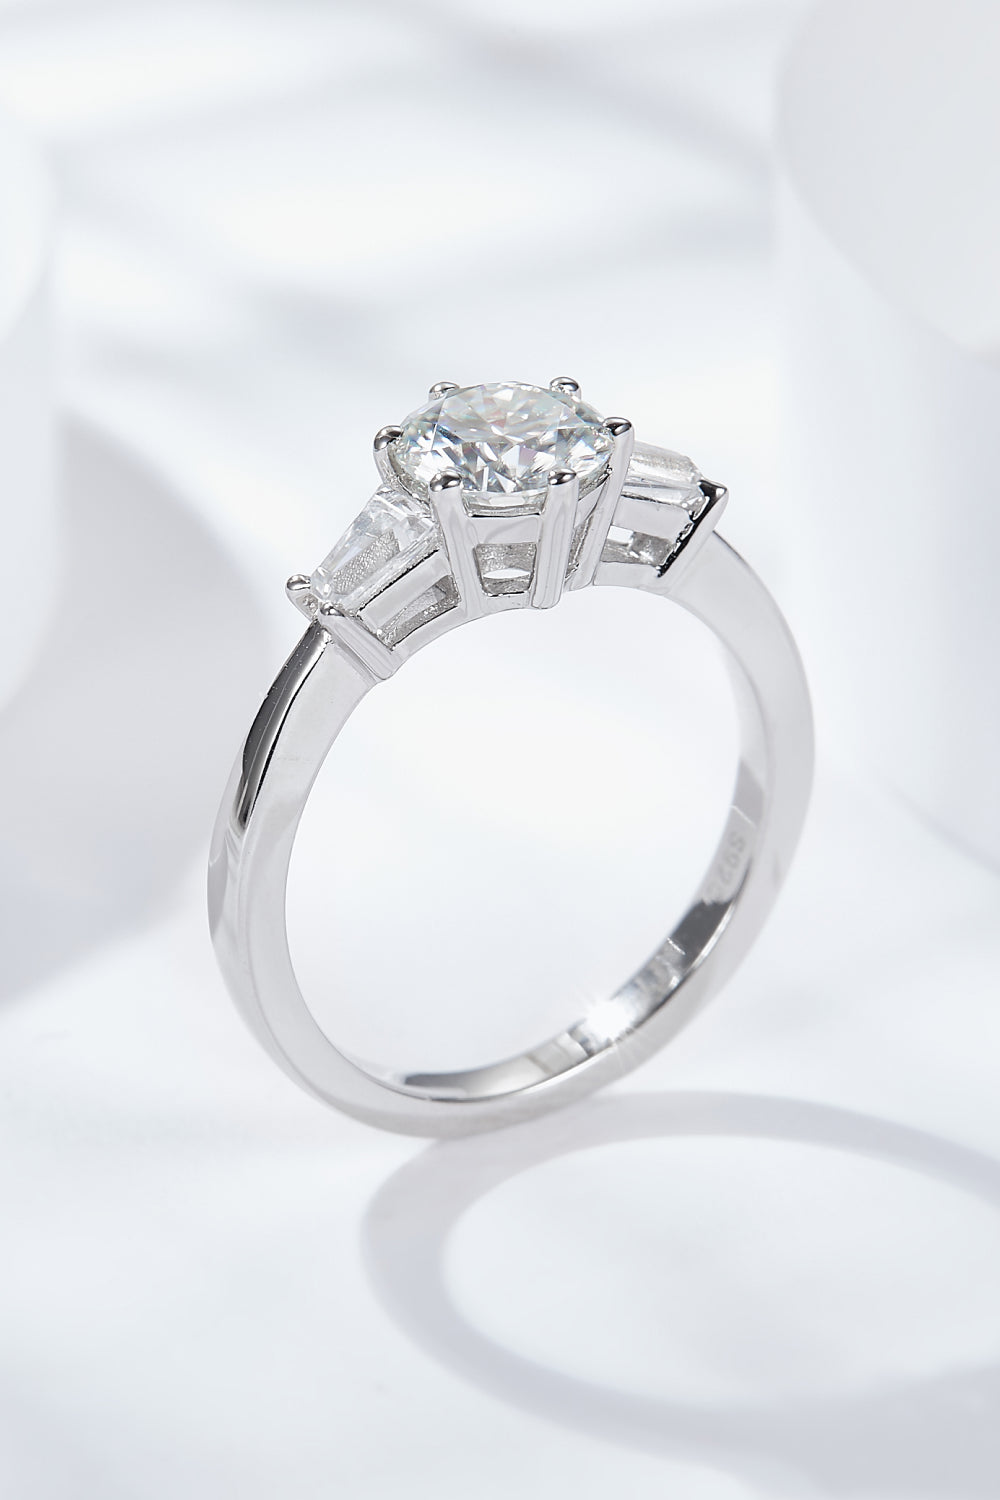 Loyal Love 1 Carat Round Brilliant Cut Moissanite Ring (Platinum Over Pure Sterling Silver)